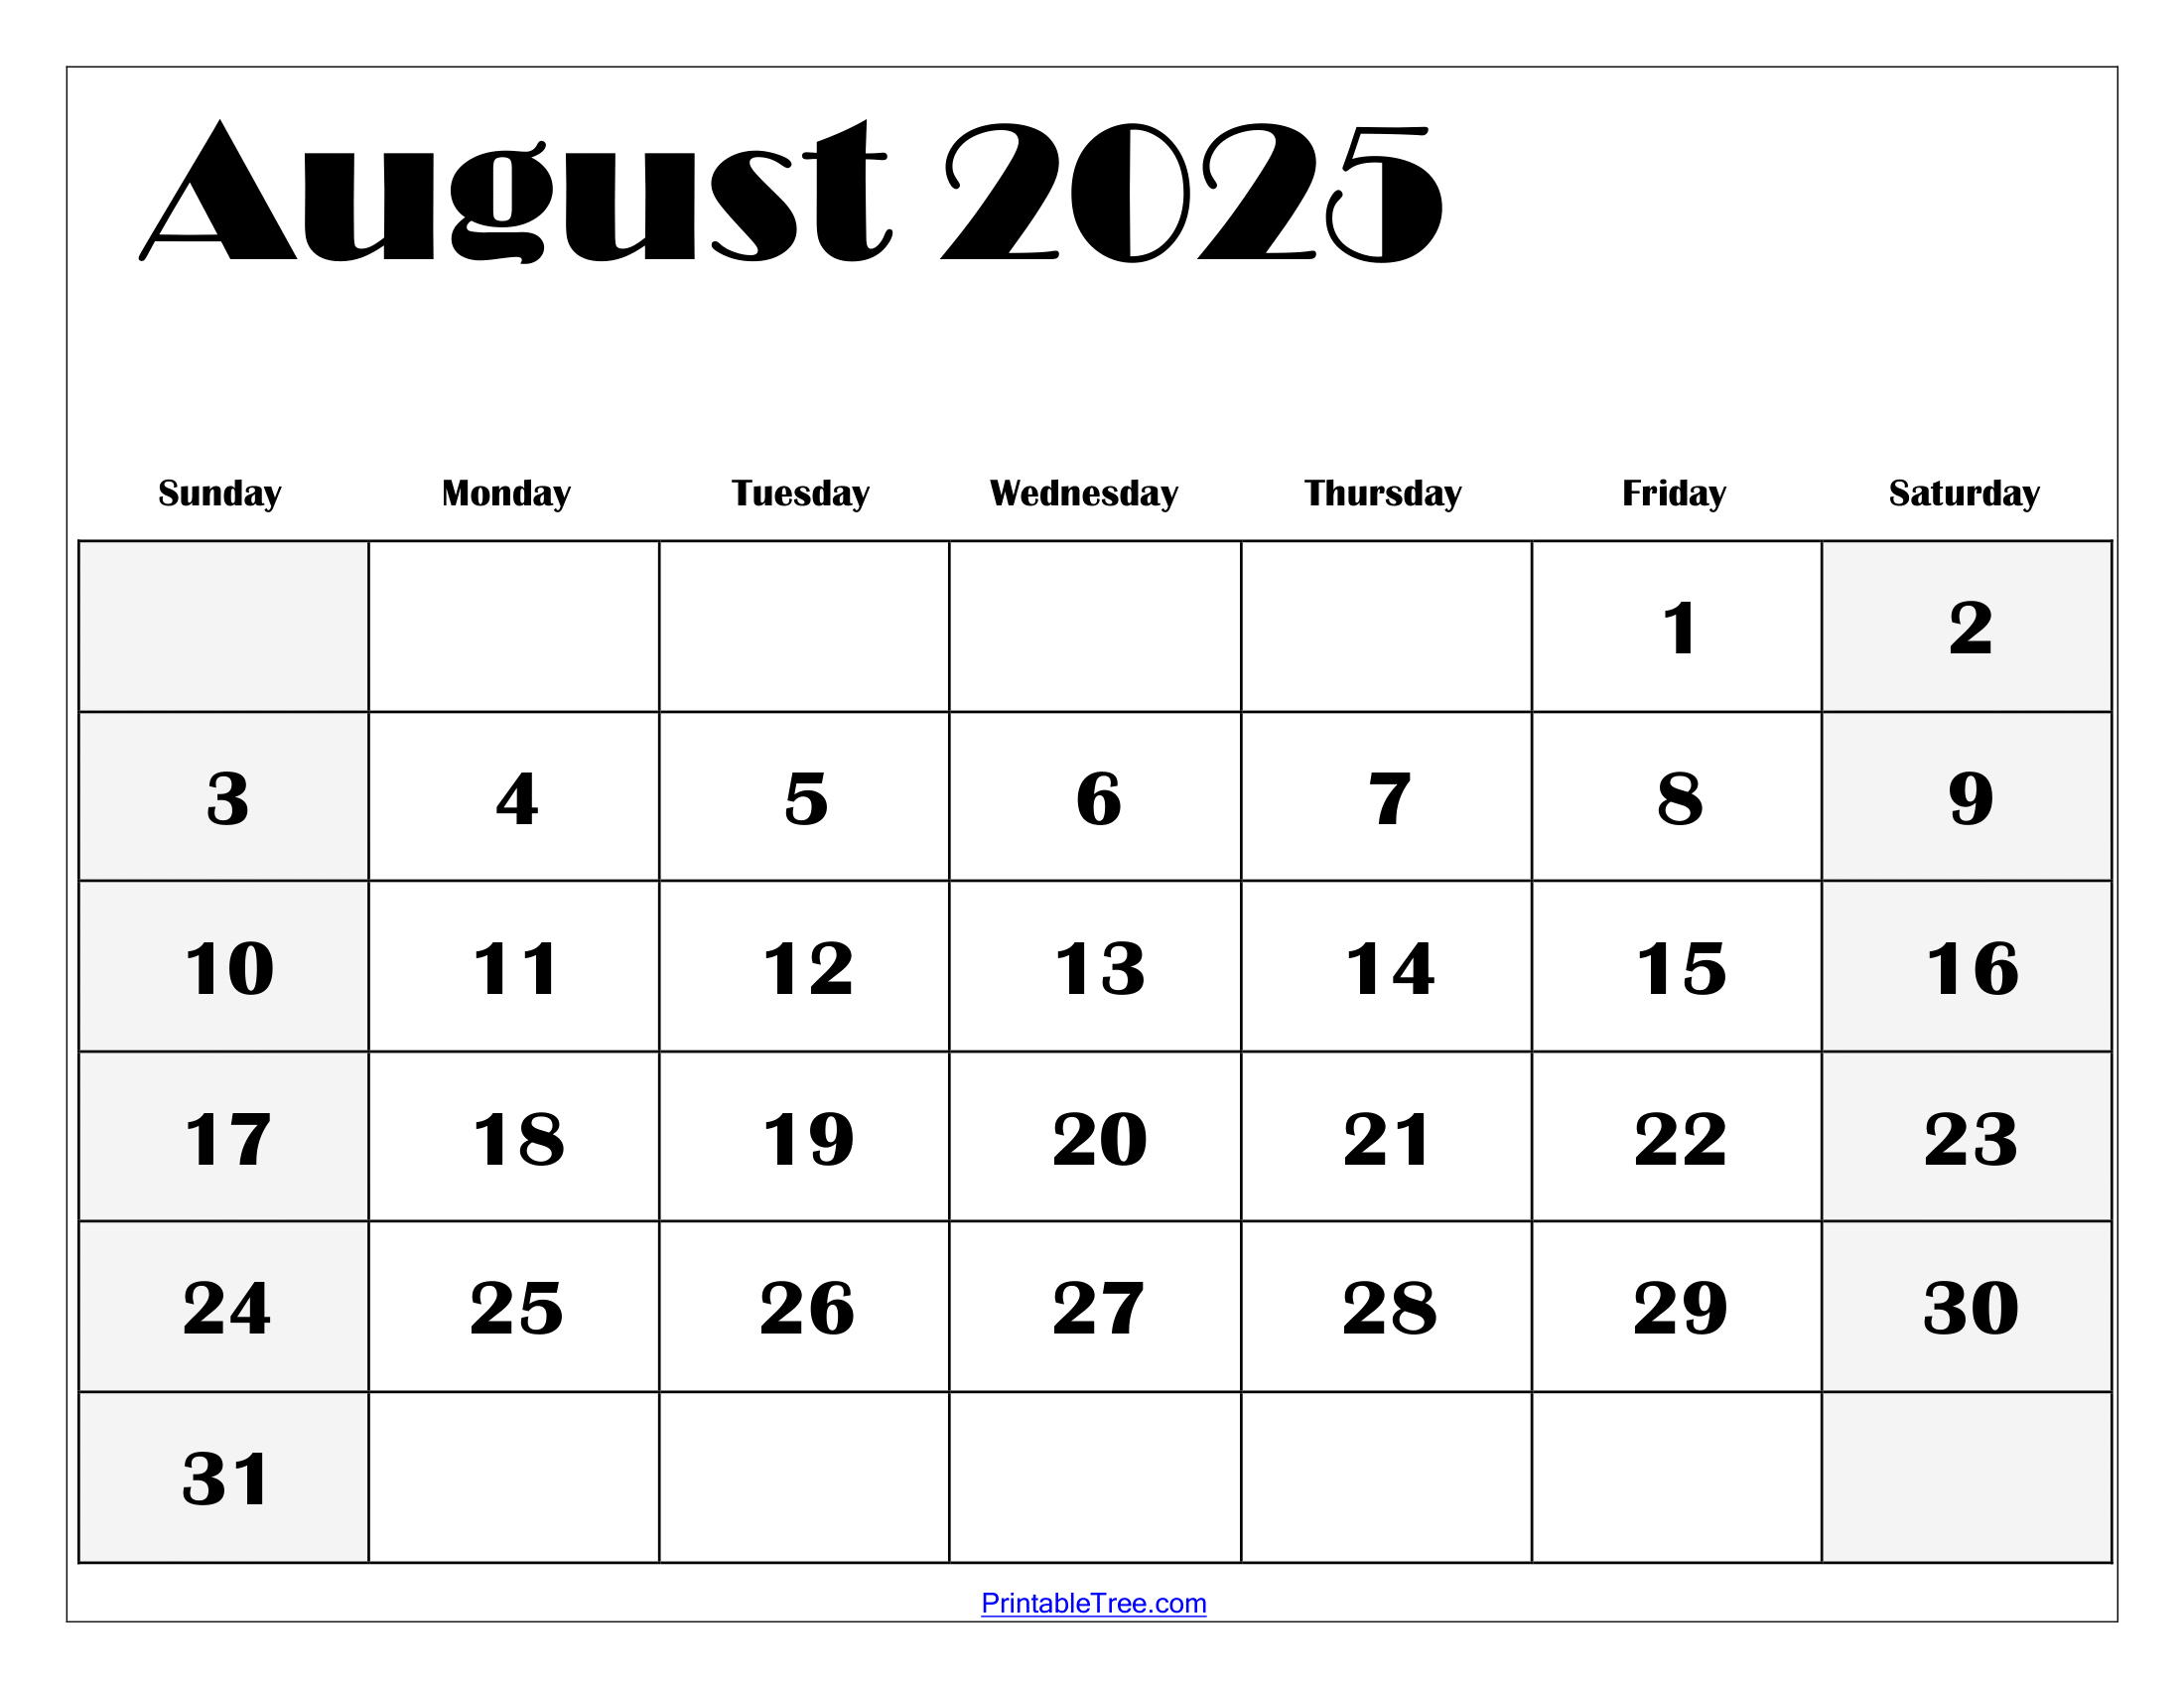 August 2025 Calendar Printable Pdf Template With Holidays in Free Printable August 2025